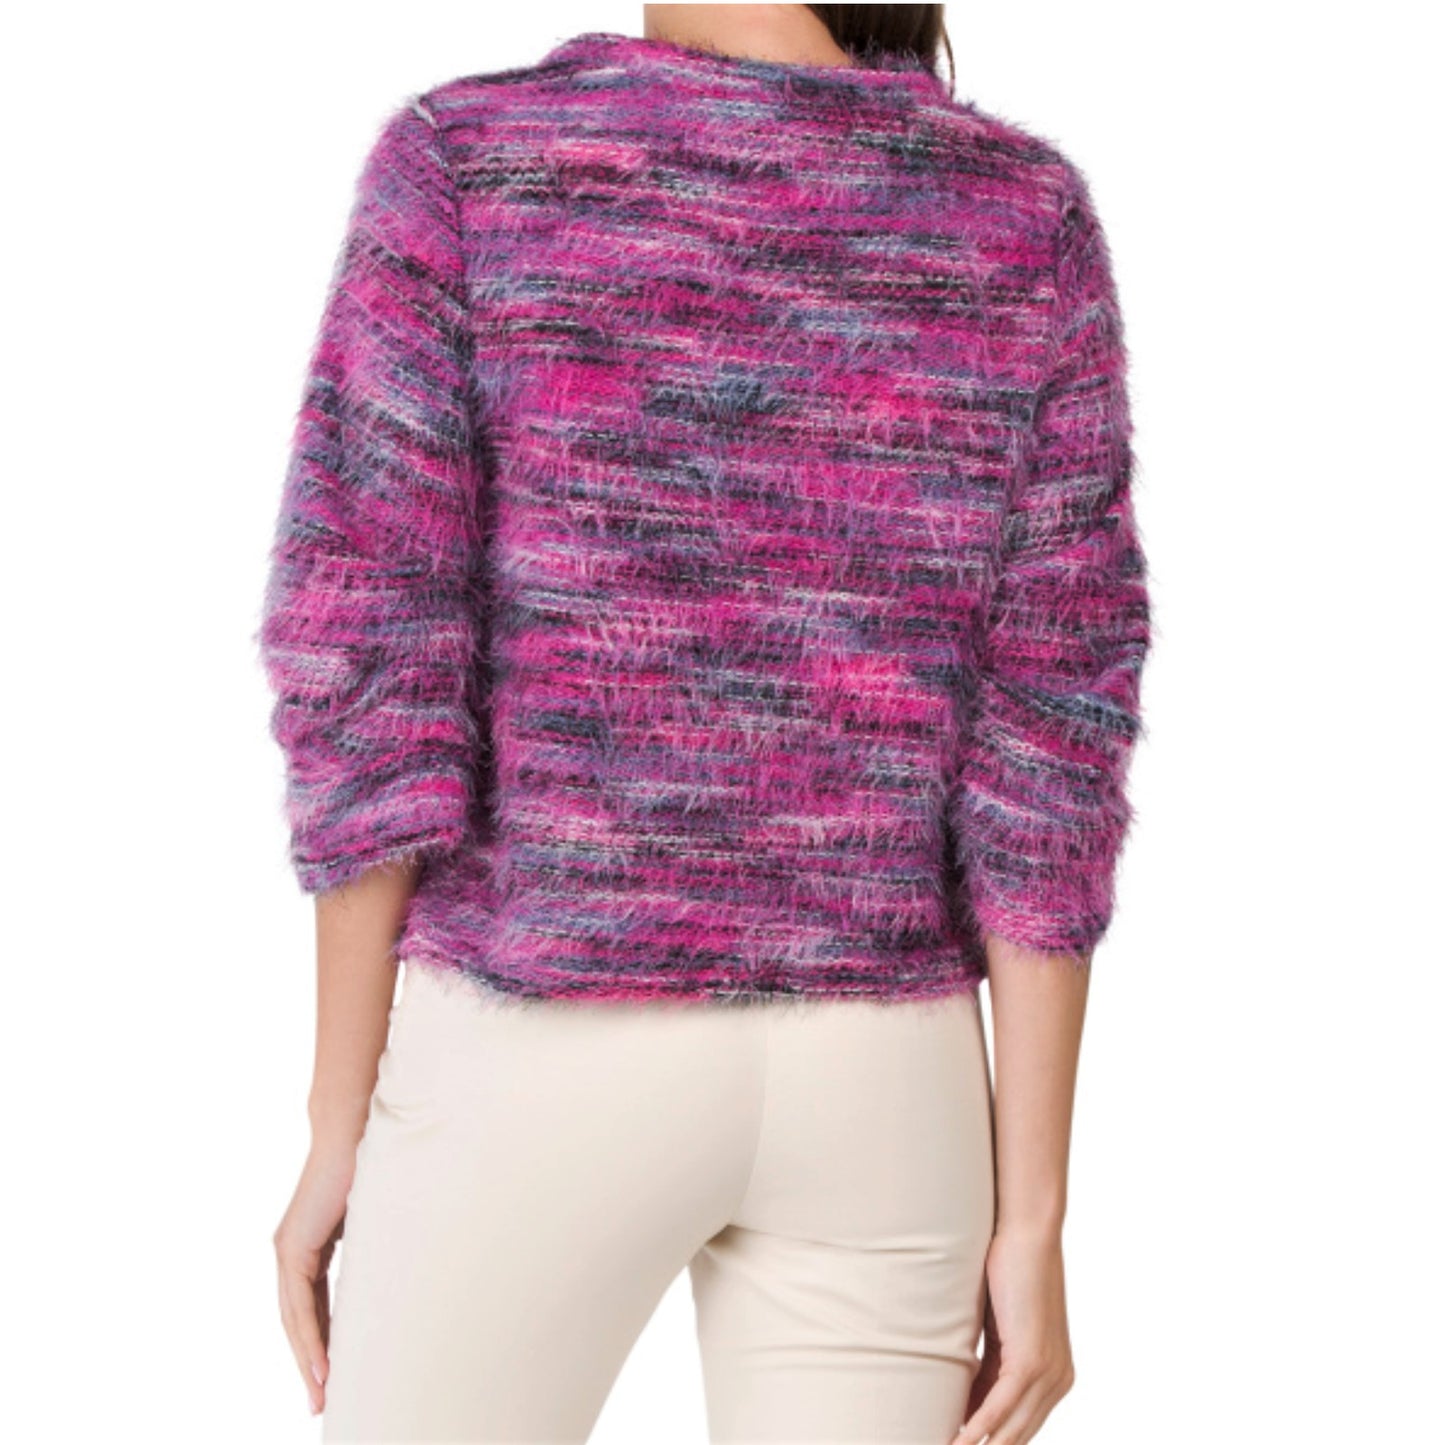 VINCE CAMUTO Mock Neck Eyelash Snit Top Fuzzy Sweater